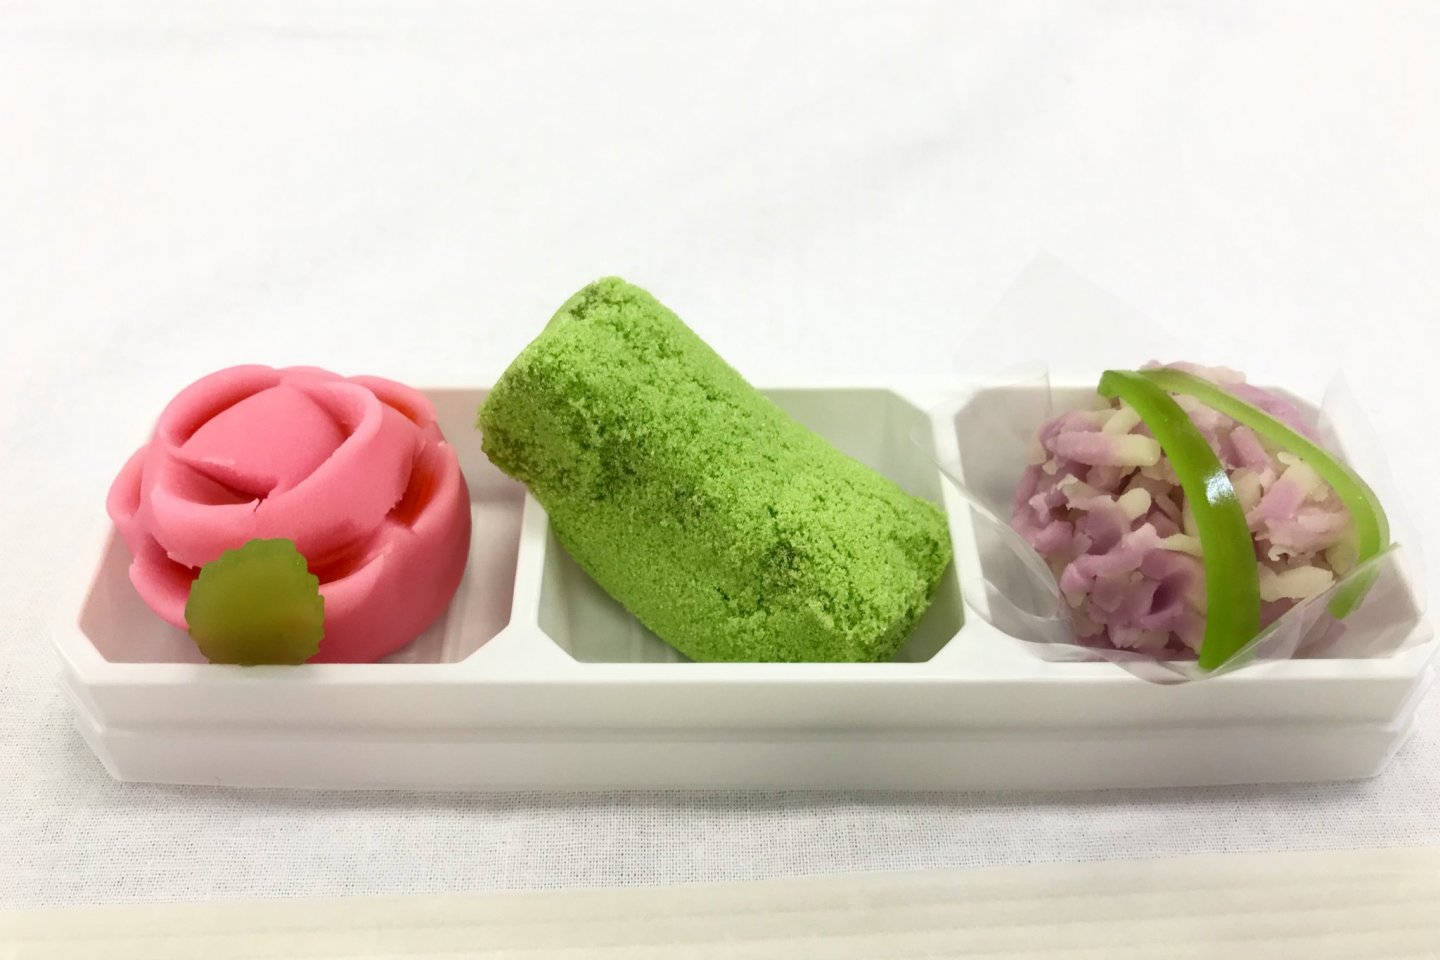 Seasonal rose and hydrangea wagashi, with a mossy stone in the middle!